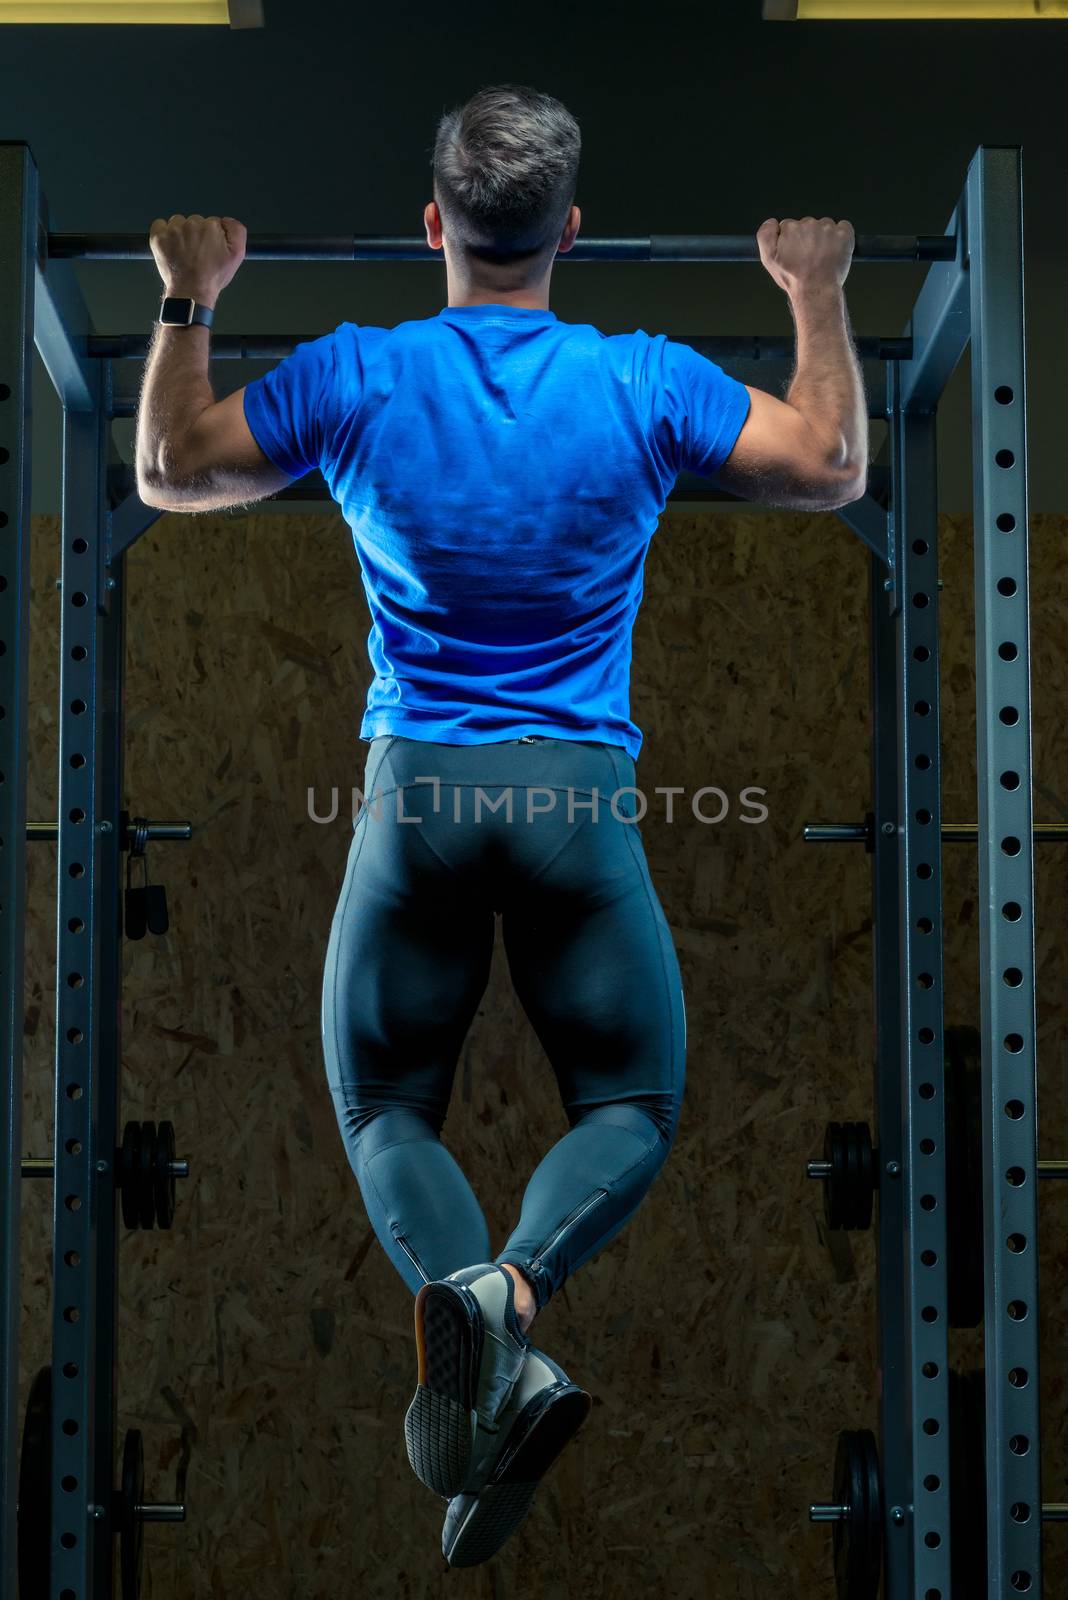 the athlete pulls himself up on the bar in the gym view from the back